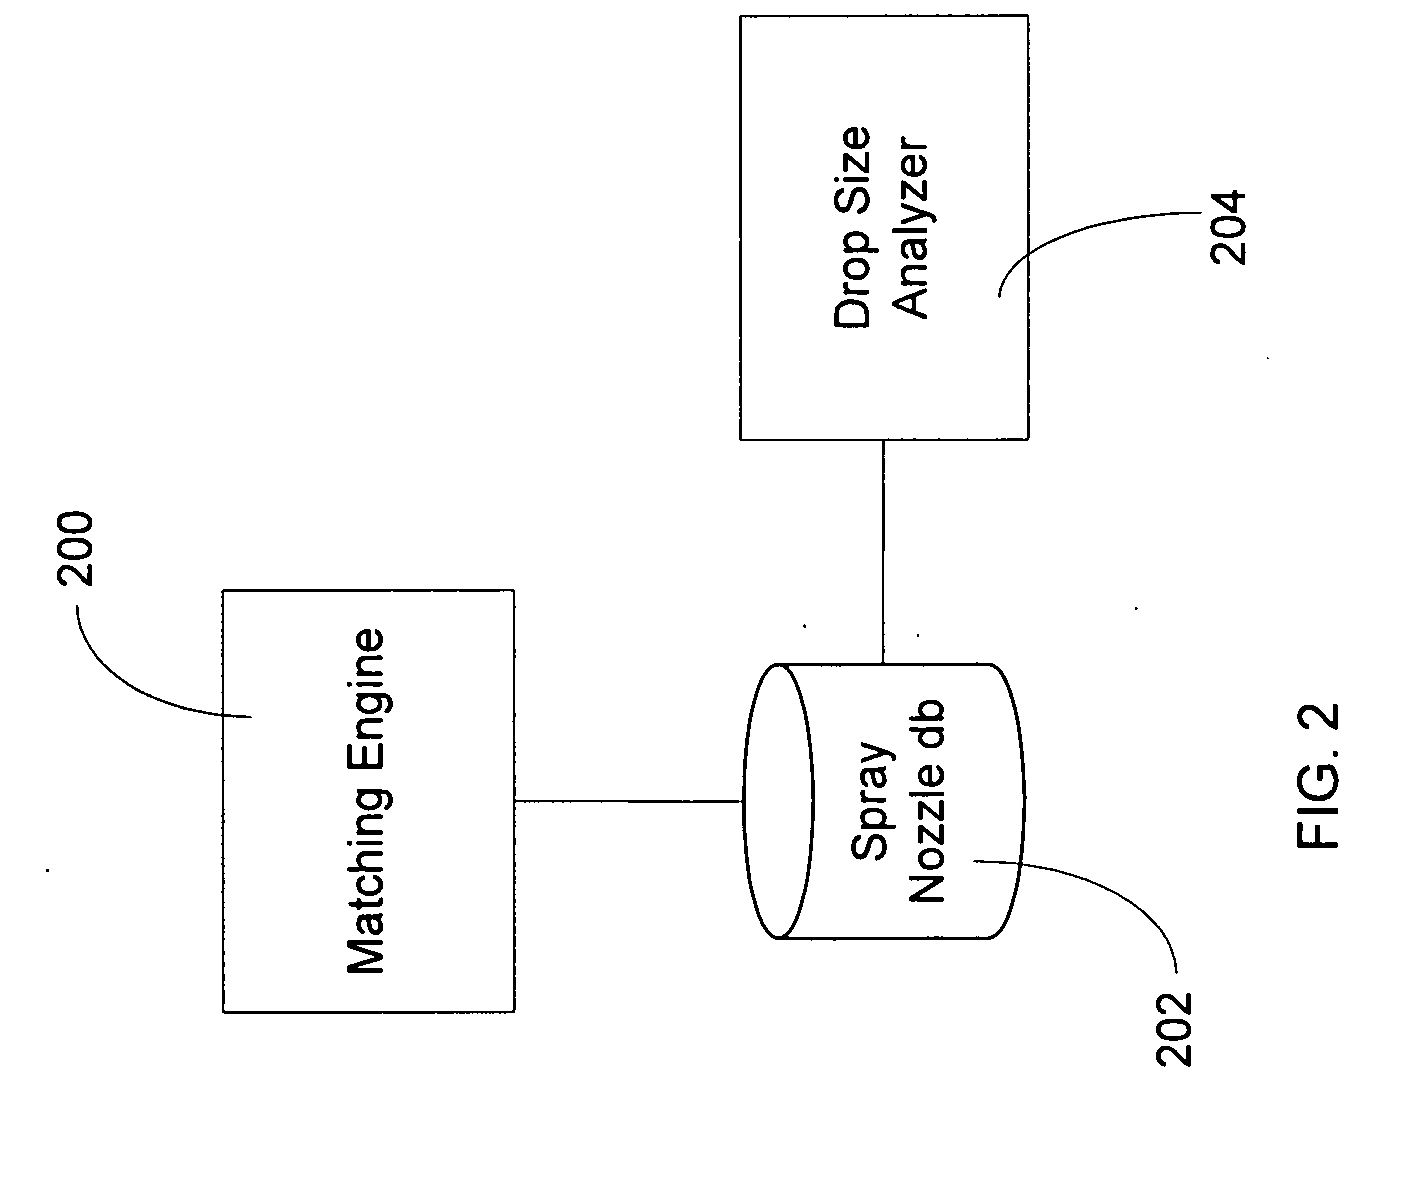 Spray nozzle configuration and modeling system